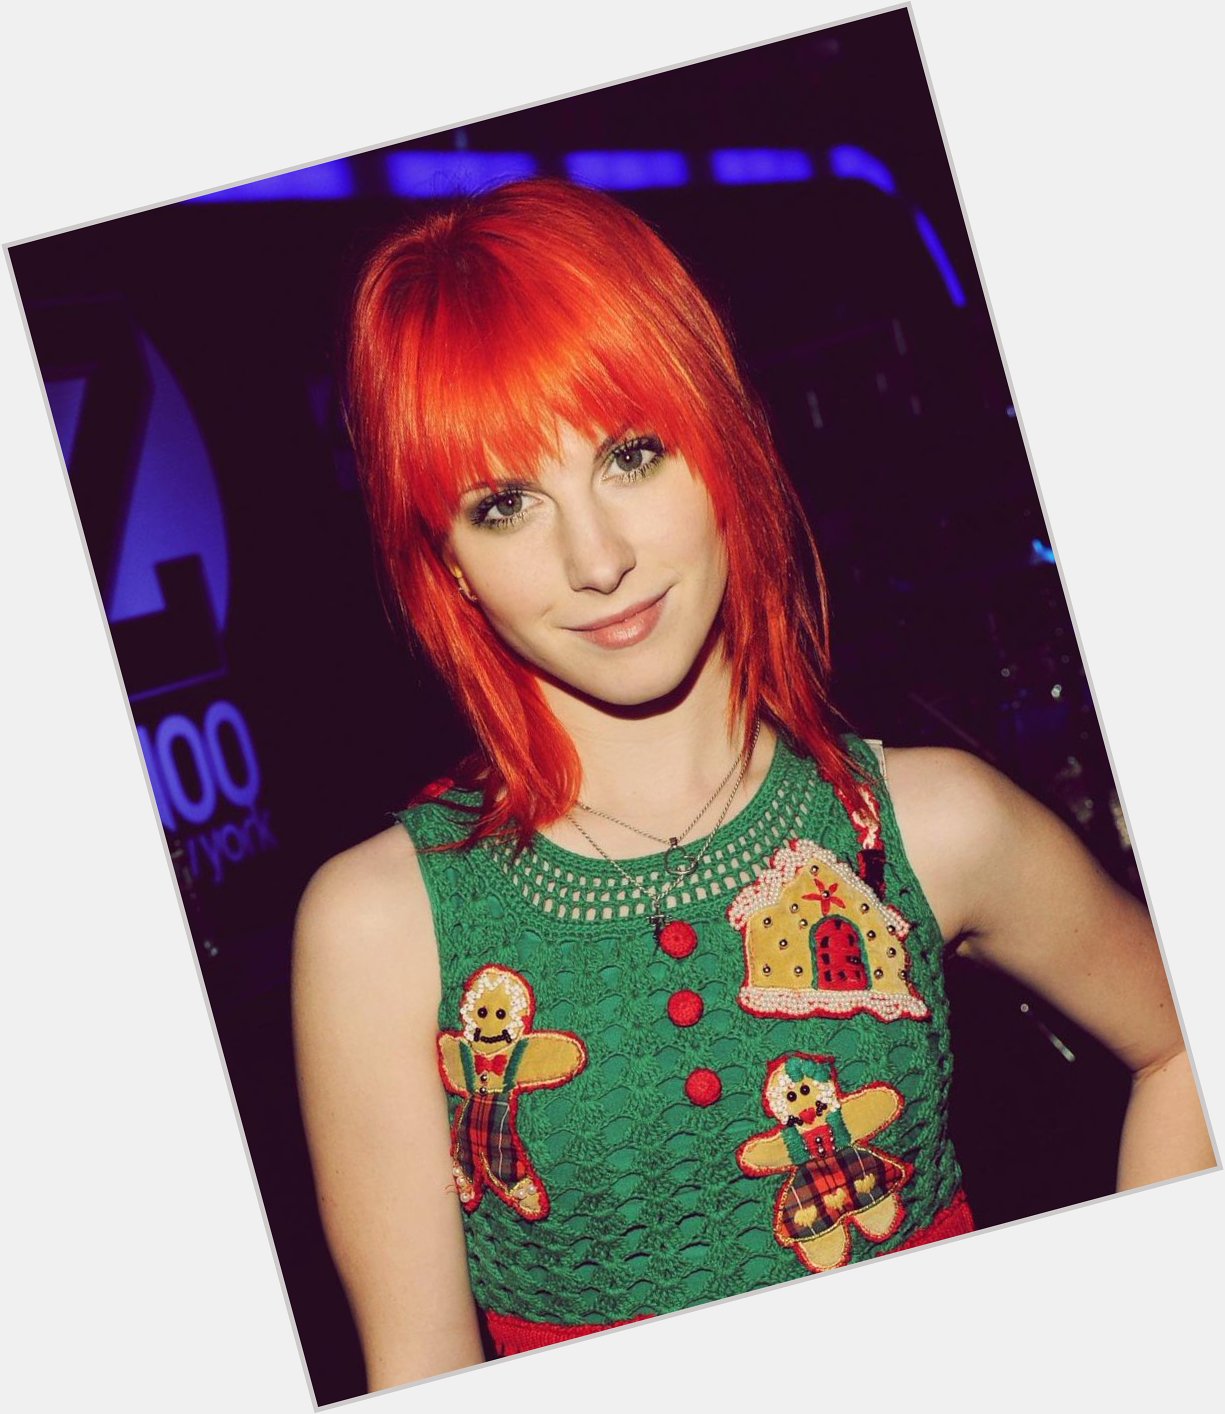 Happy Birthday to Hayley Williams, who turns 26 today! 